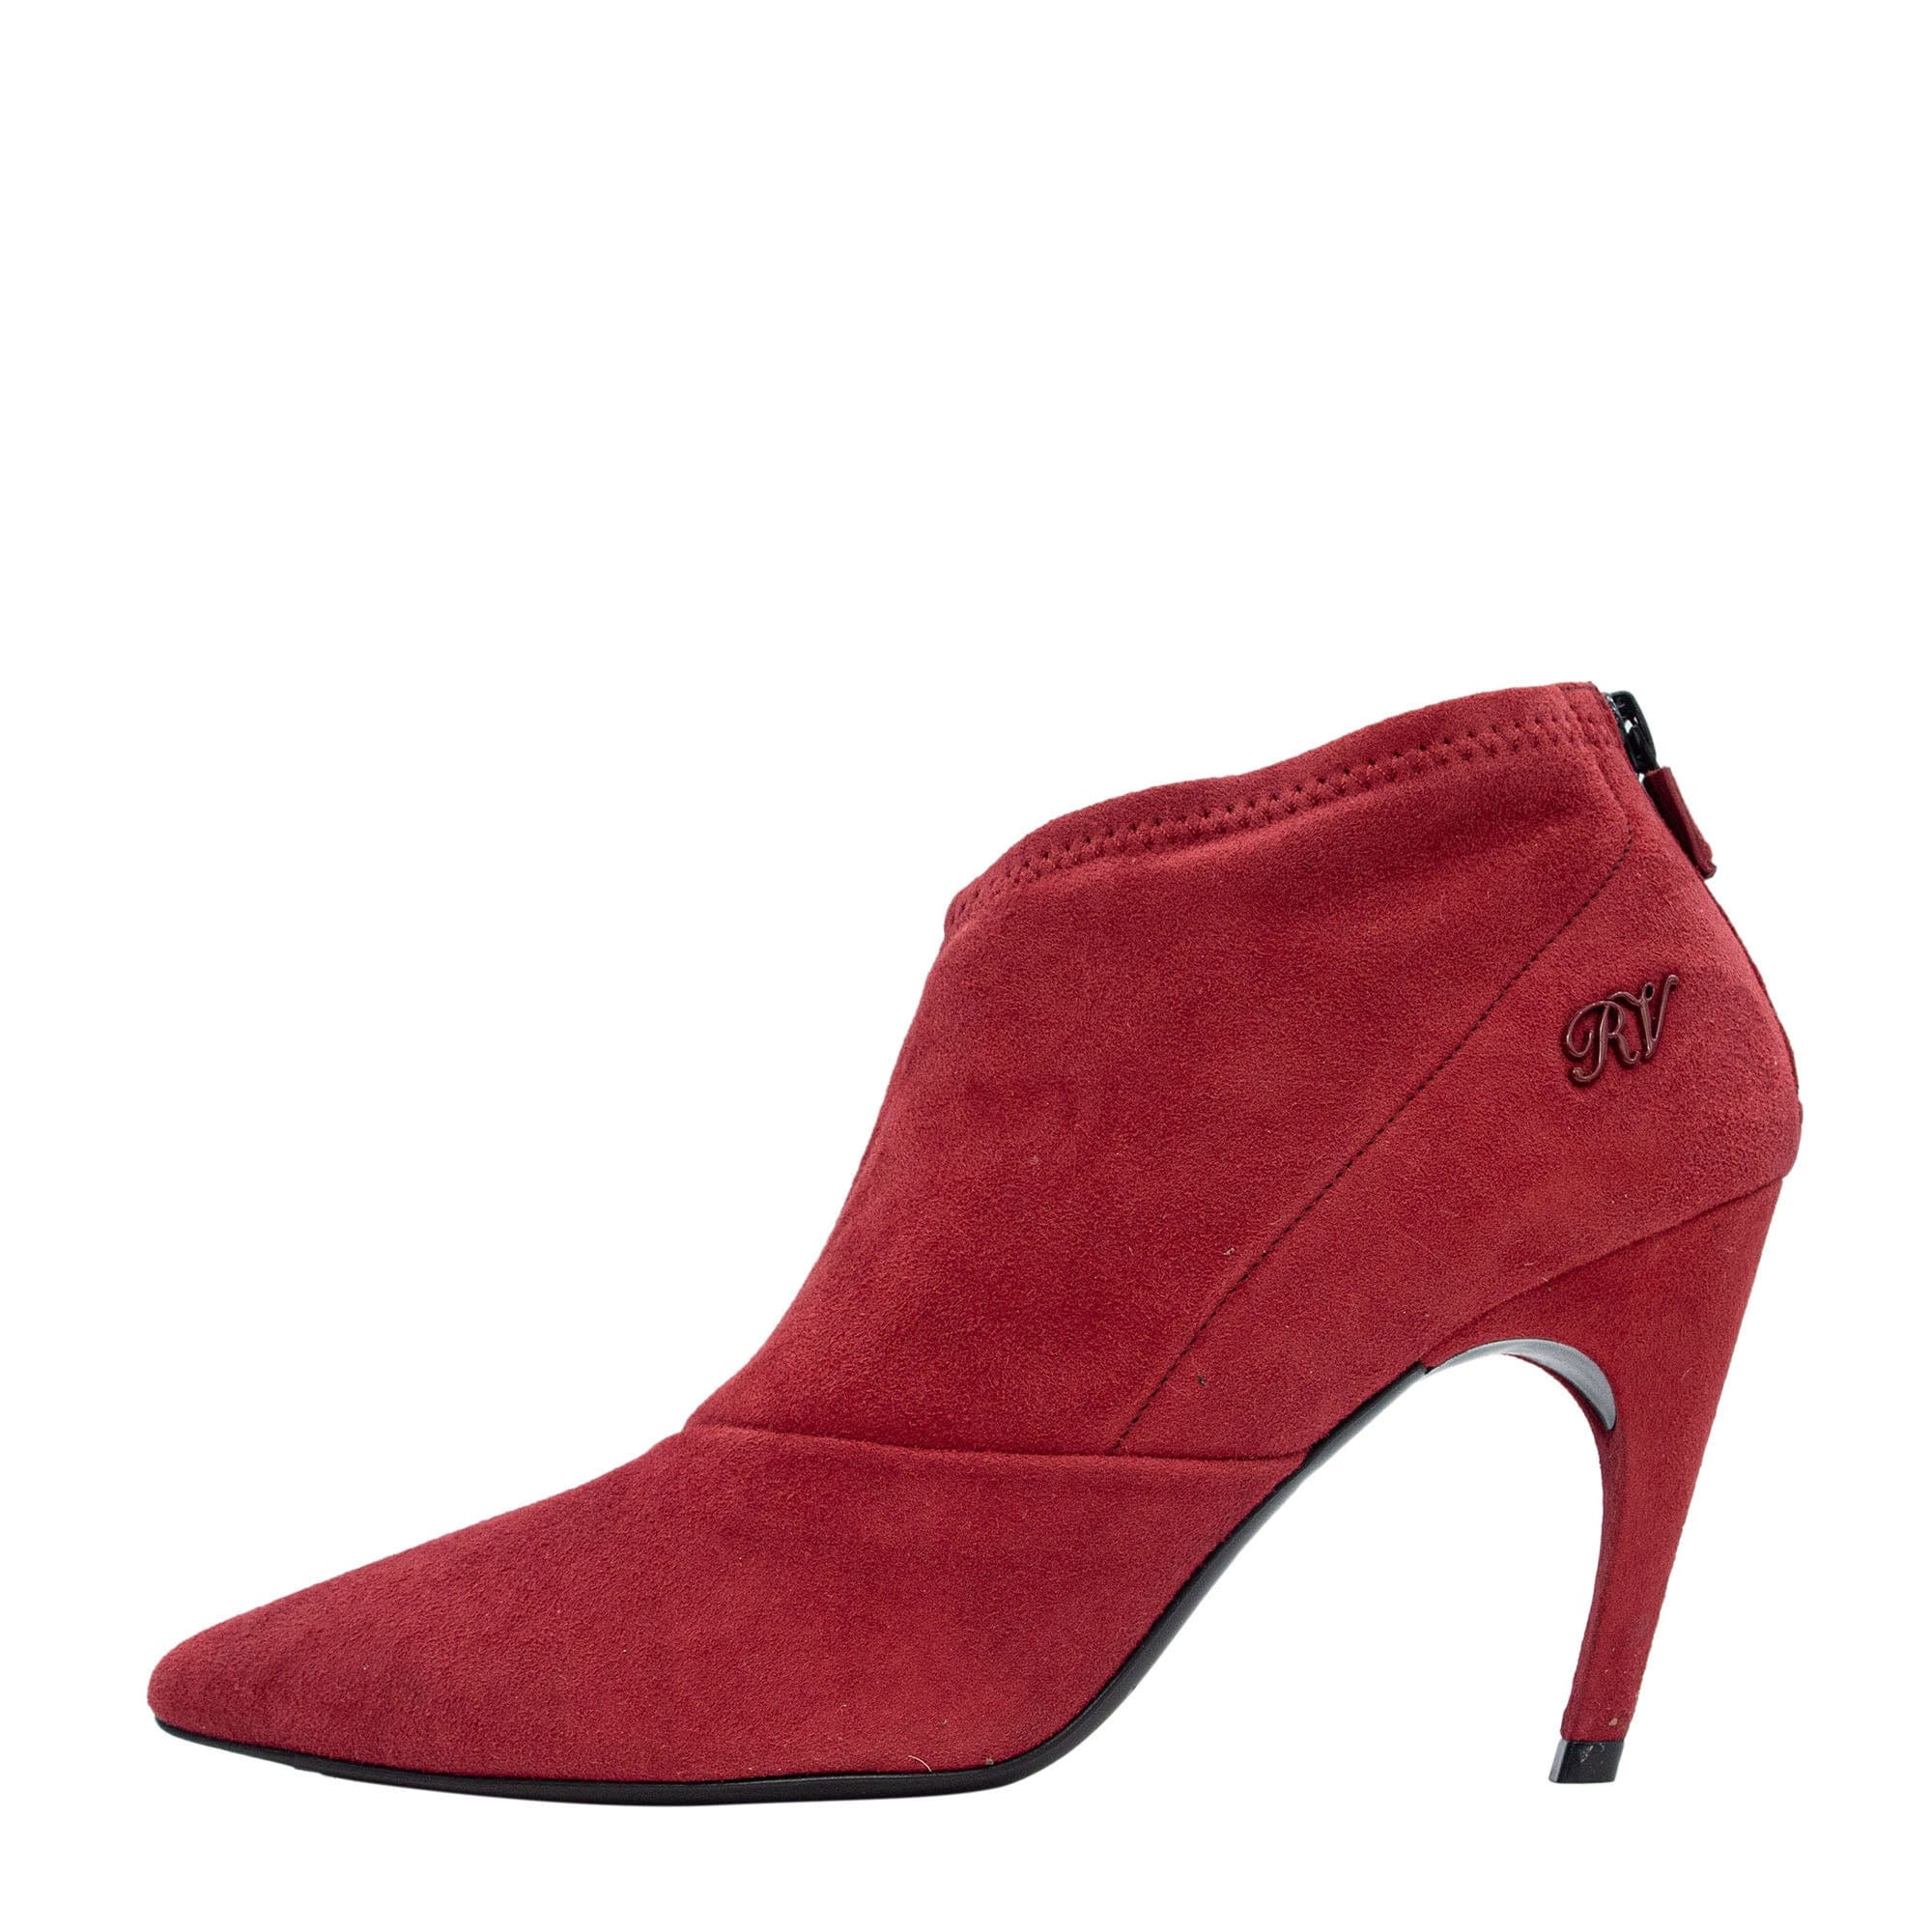 Roger Vivier Roger Vivier Red Suede Ankle Boots 37 SYCH106